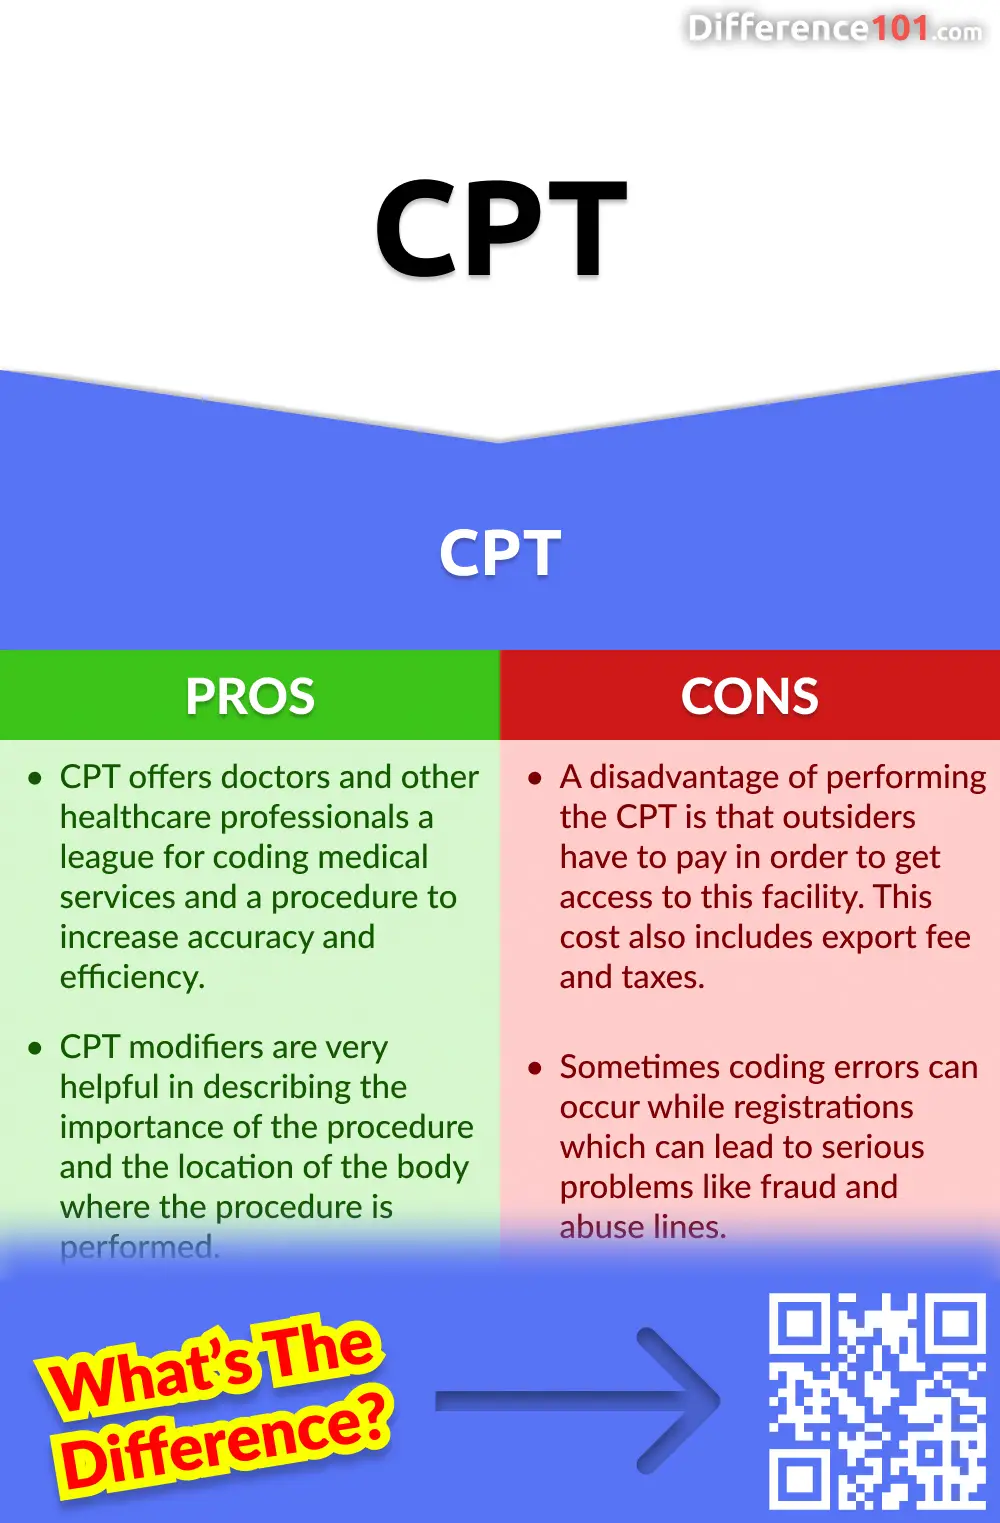 CPT Pros and Cons
